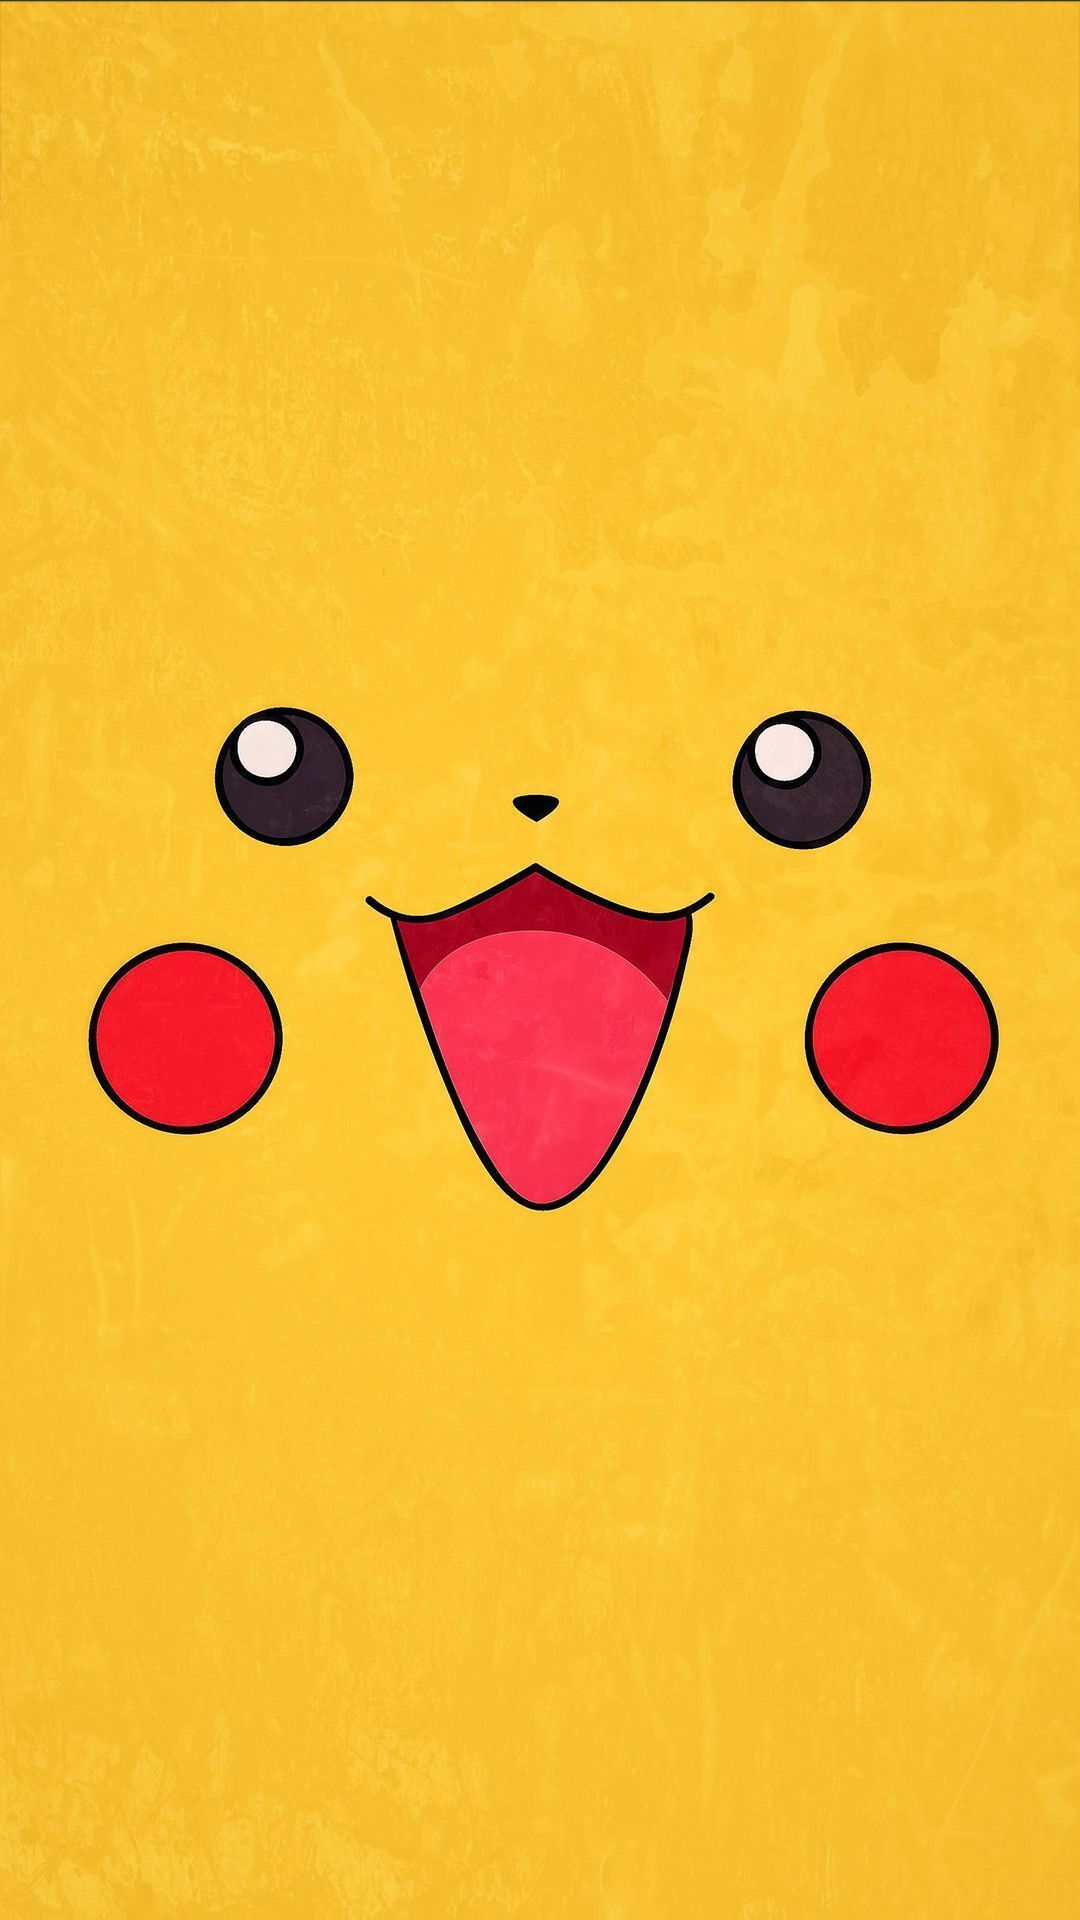 Tap for 2 seconds to save the wallpaper Pokemon wallpaper for